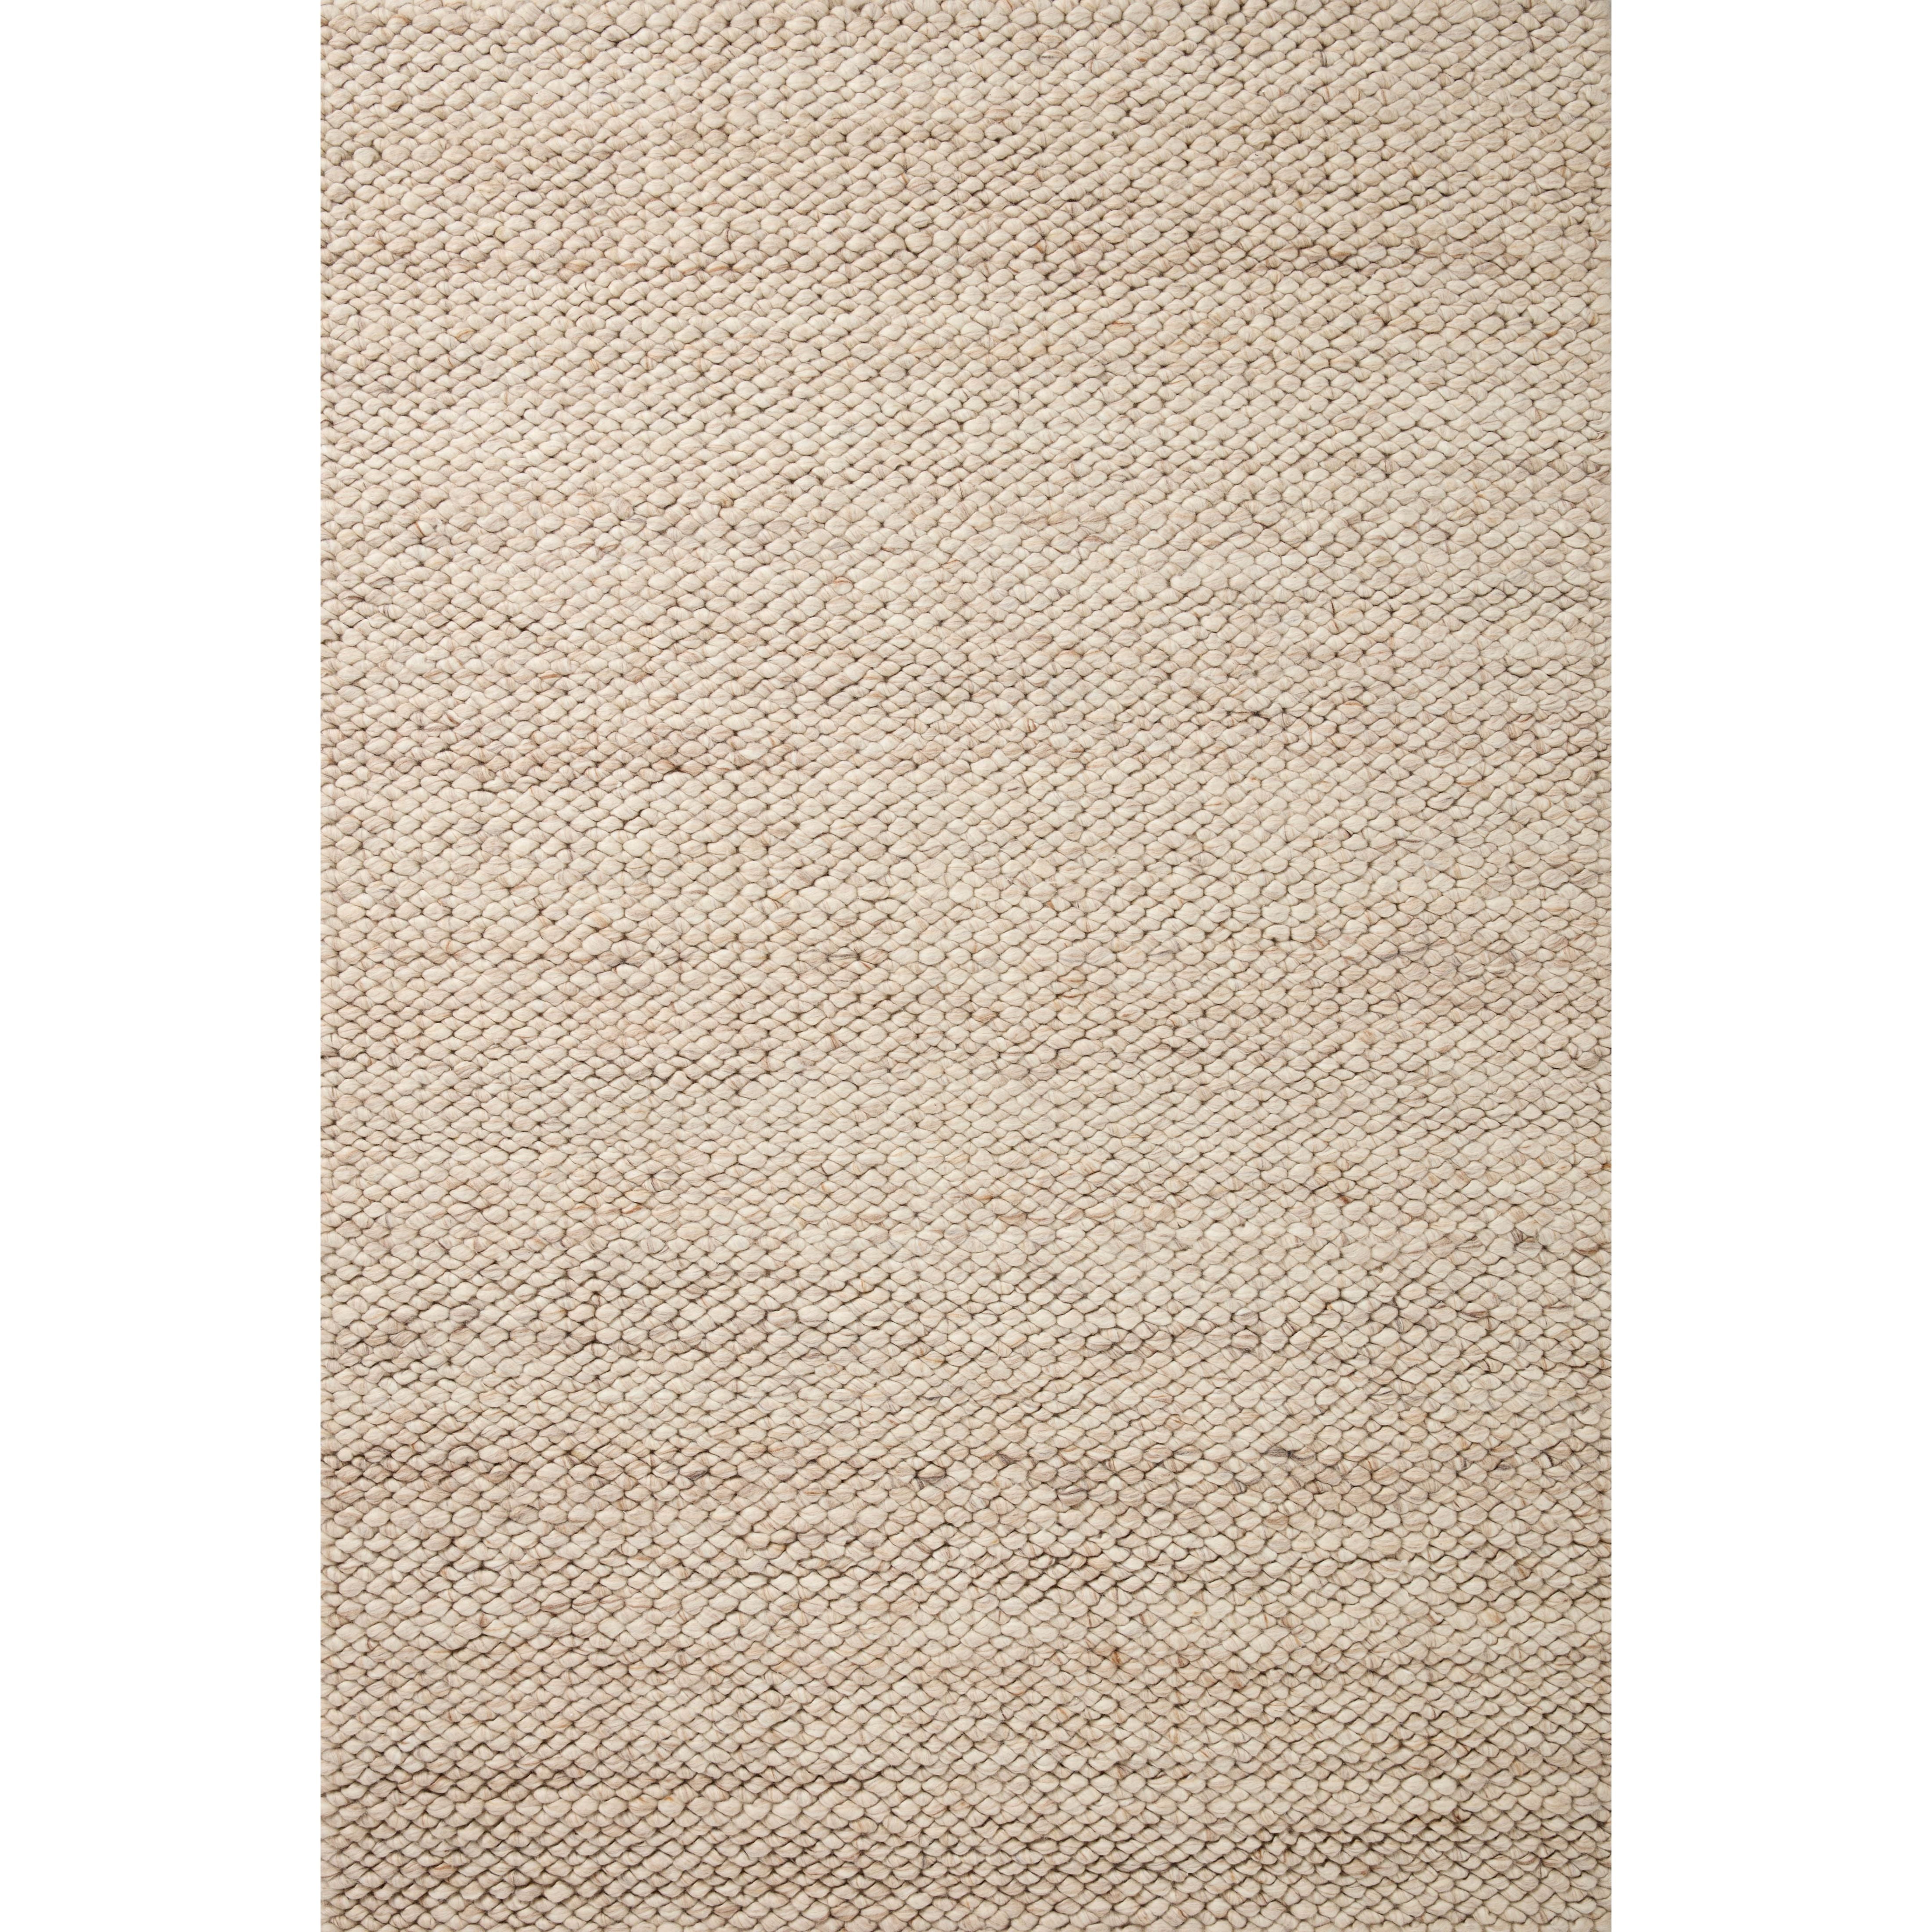 The Hendrick Natural Rug is a beautifully textured wool area rug with an elevated ease reminiscent of a cozy handmade sweater. The rug is very plush underfoot, making it equally welcome in bedrooms and living rooms. The hand-woven weave pattern adds dimension while the rug’s color palette is soft, neutral, and serene. Amethyst Home provides interior design, new construction, custom furniture, and area rugs in the Park City metro area.